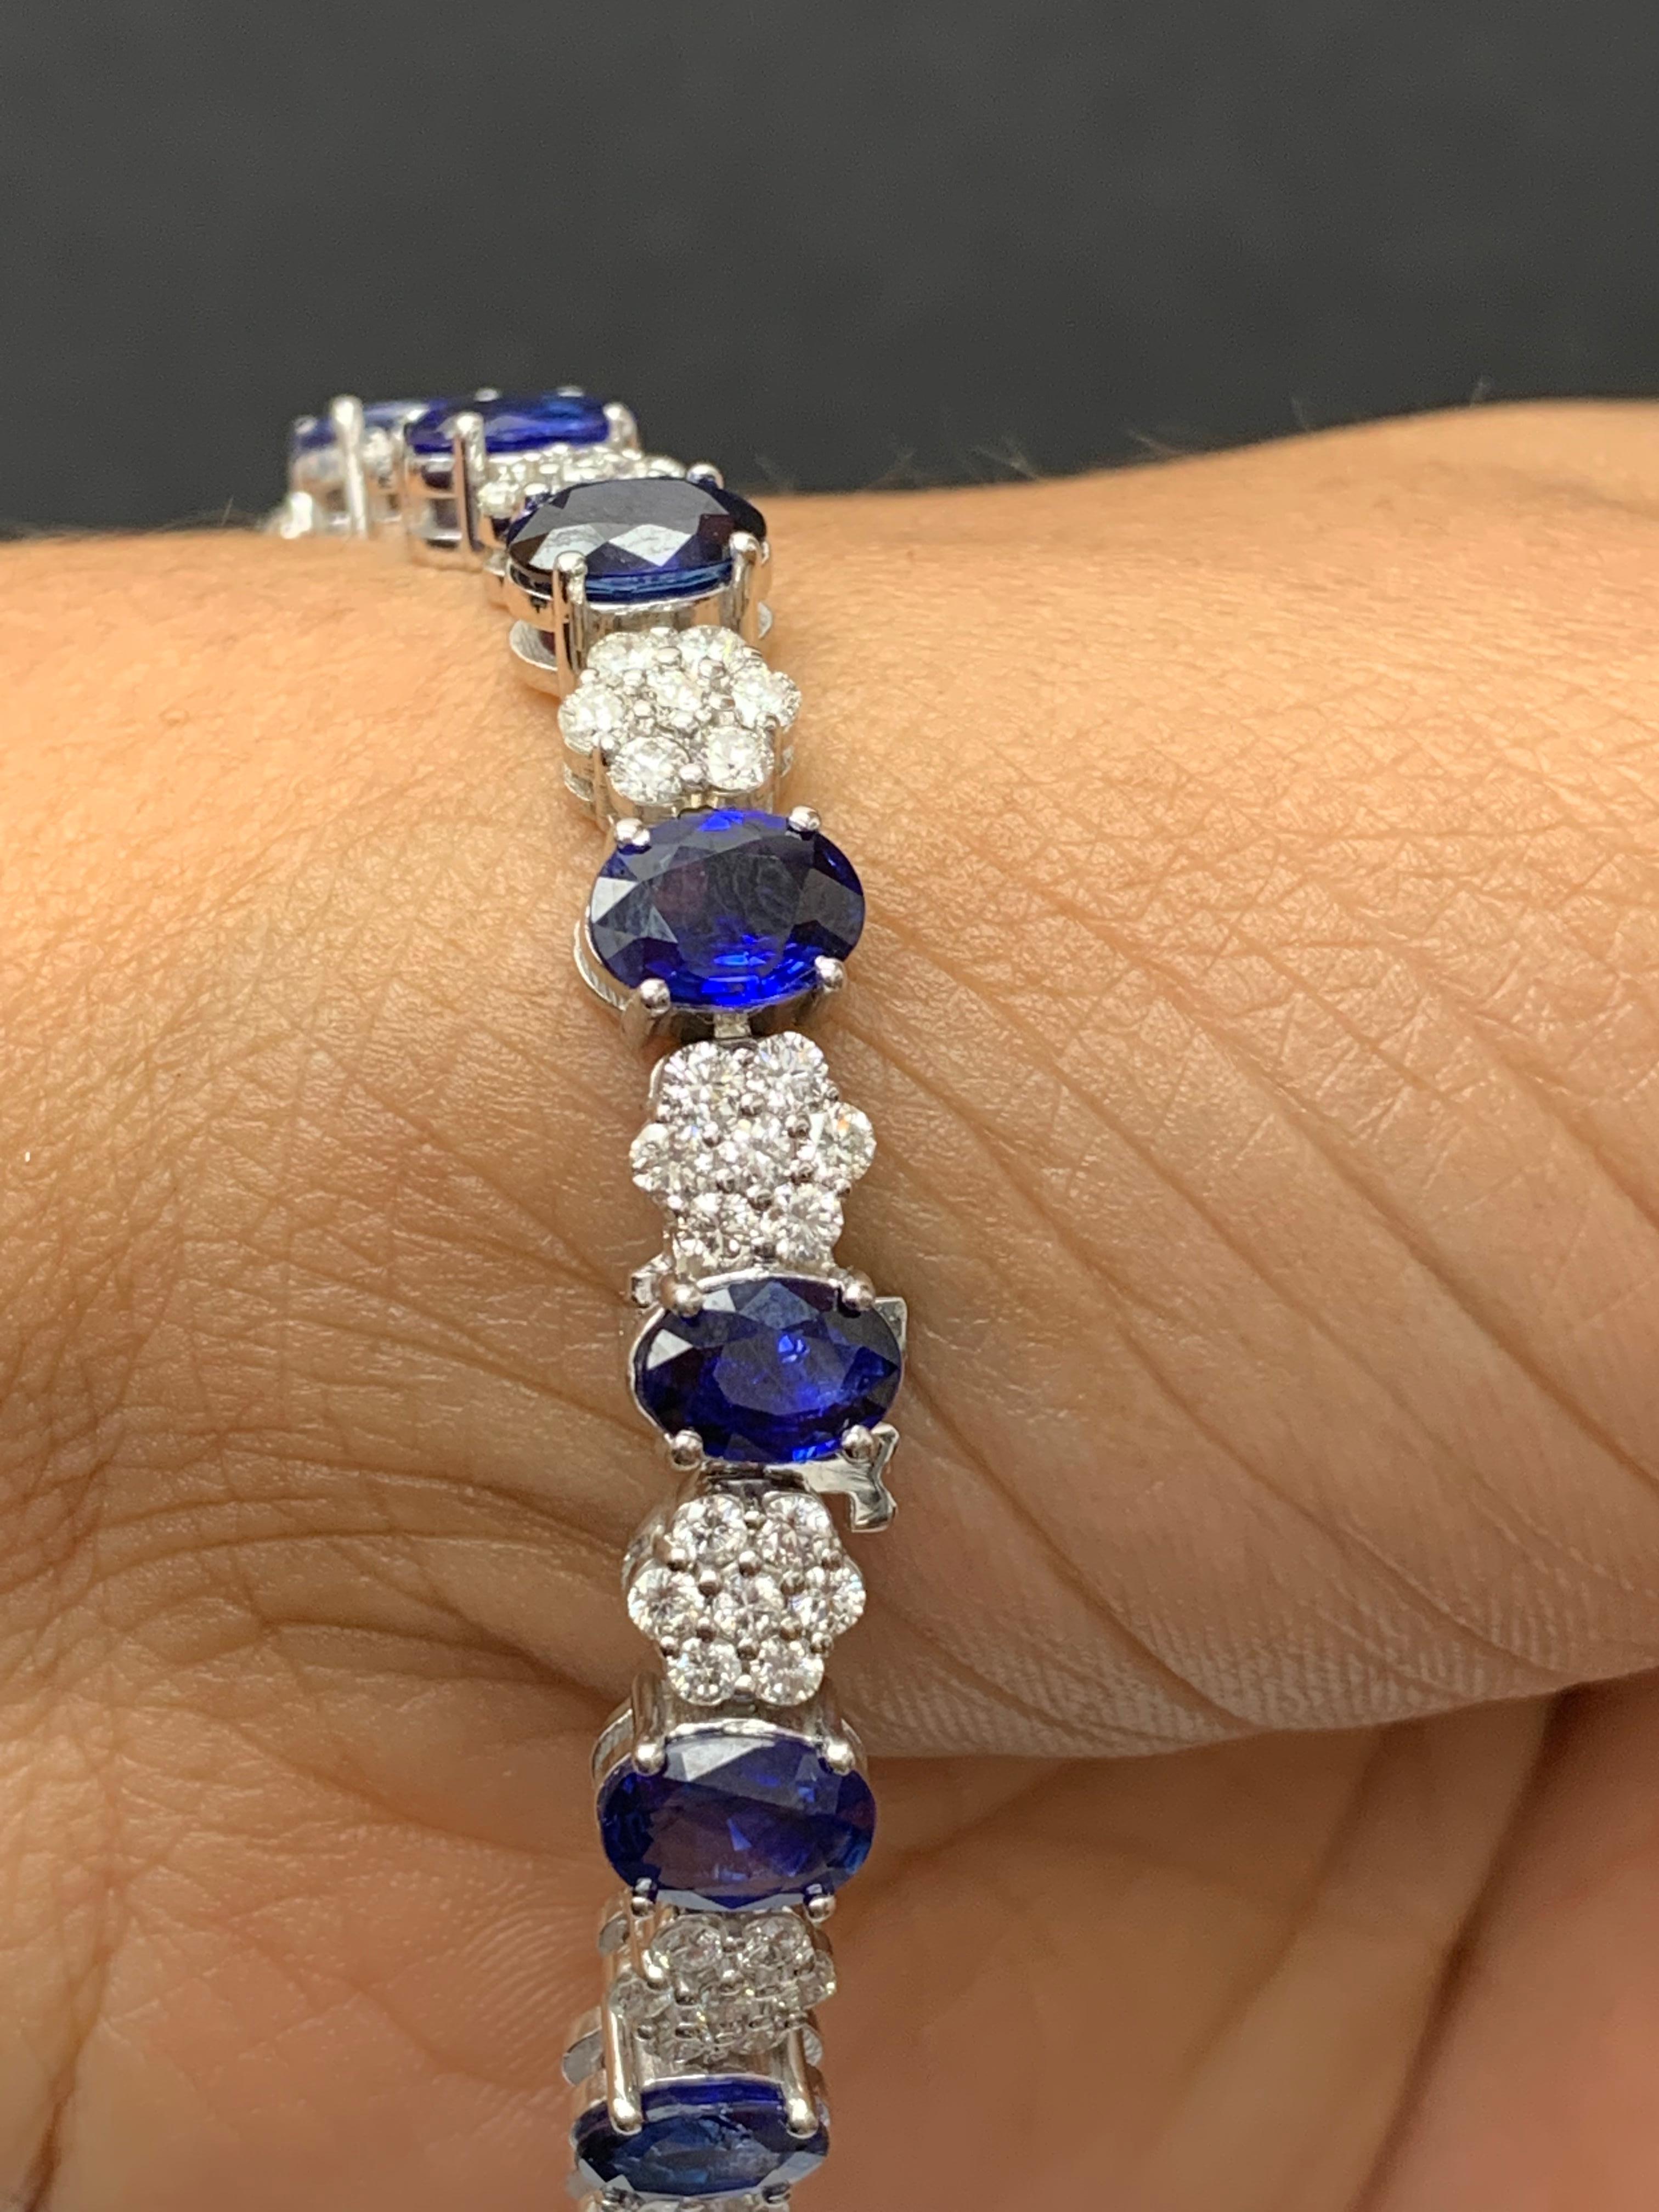 15.26 Carat Oval Cut Blue Sapphire and Diamond Tennis Bracelet in 14K White Gold For Sale 1